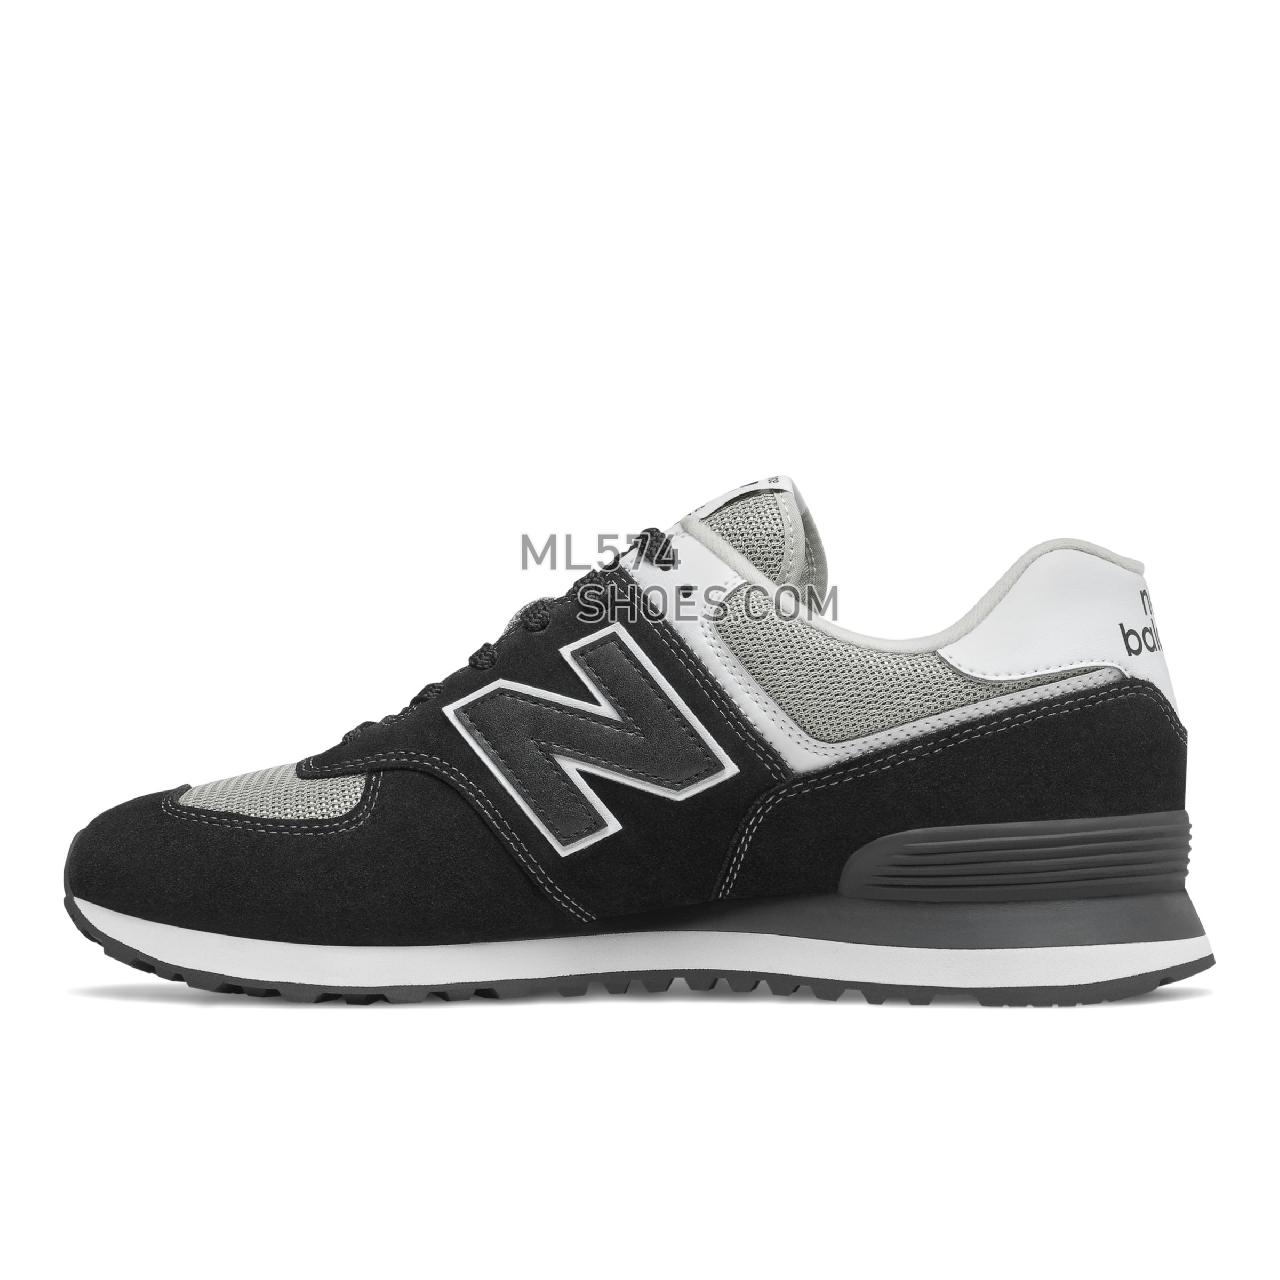 New Balance 574v2 - Men's Classic Sneakers - Black with White - ML574SSN